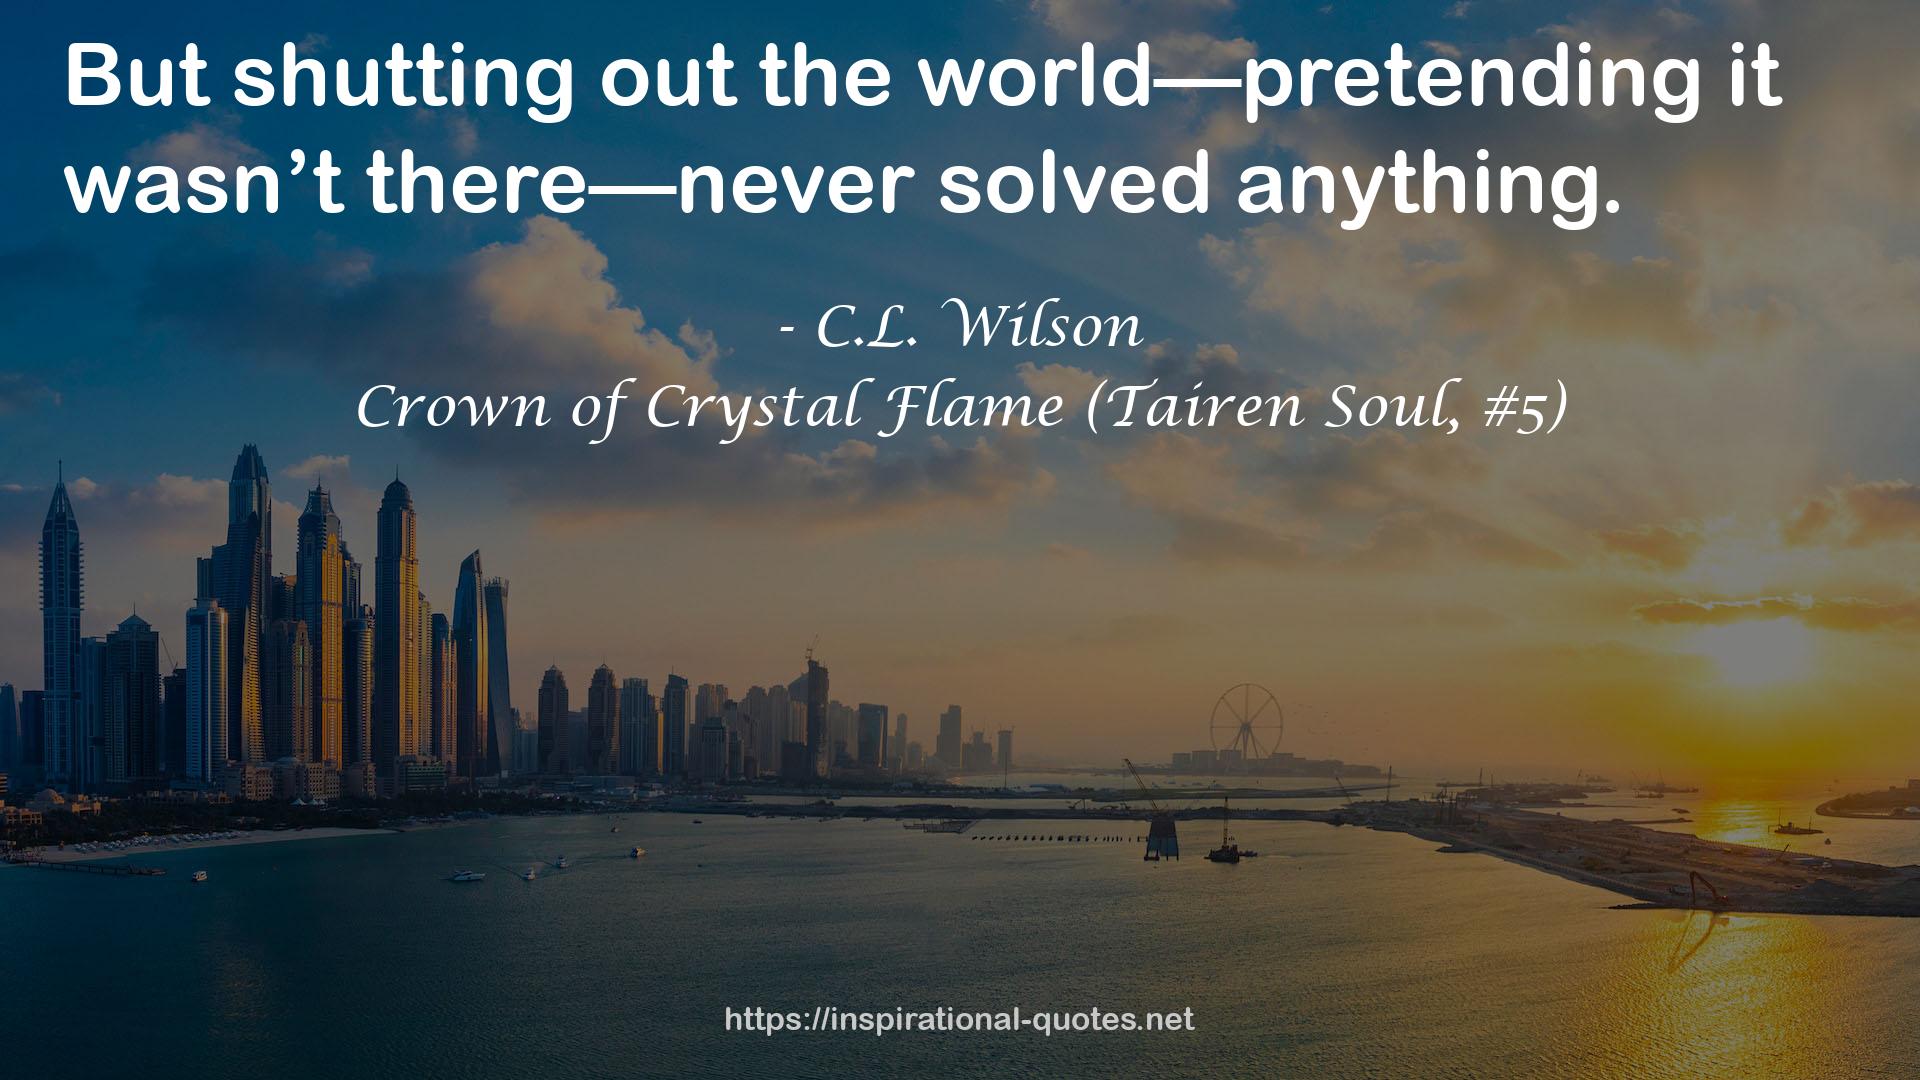 Crown of Crystal Flame (Tairen Soul, #5) QUOTES